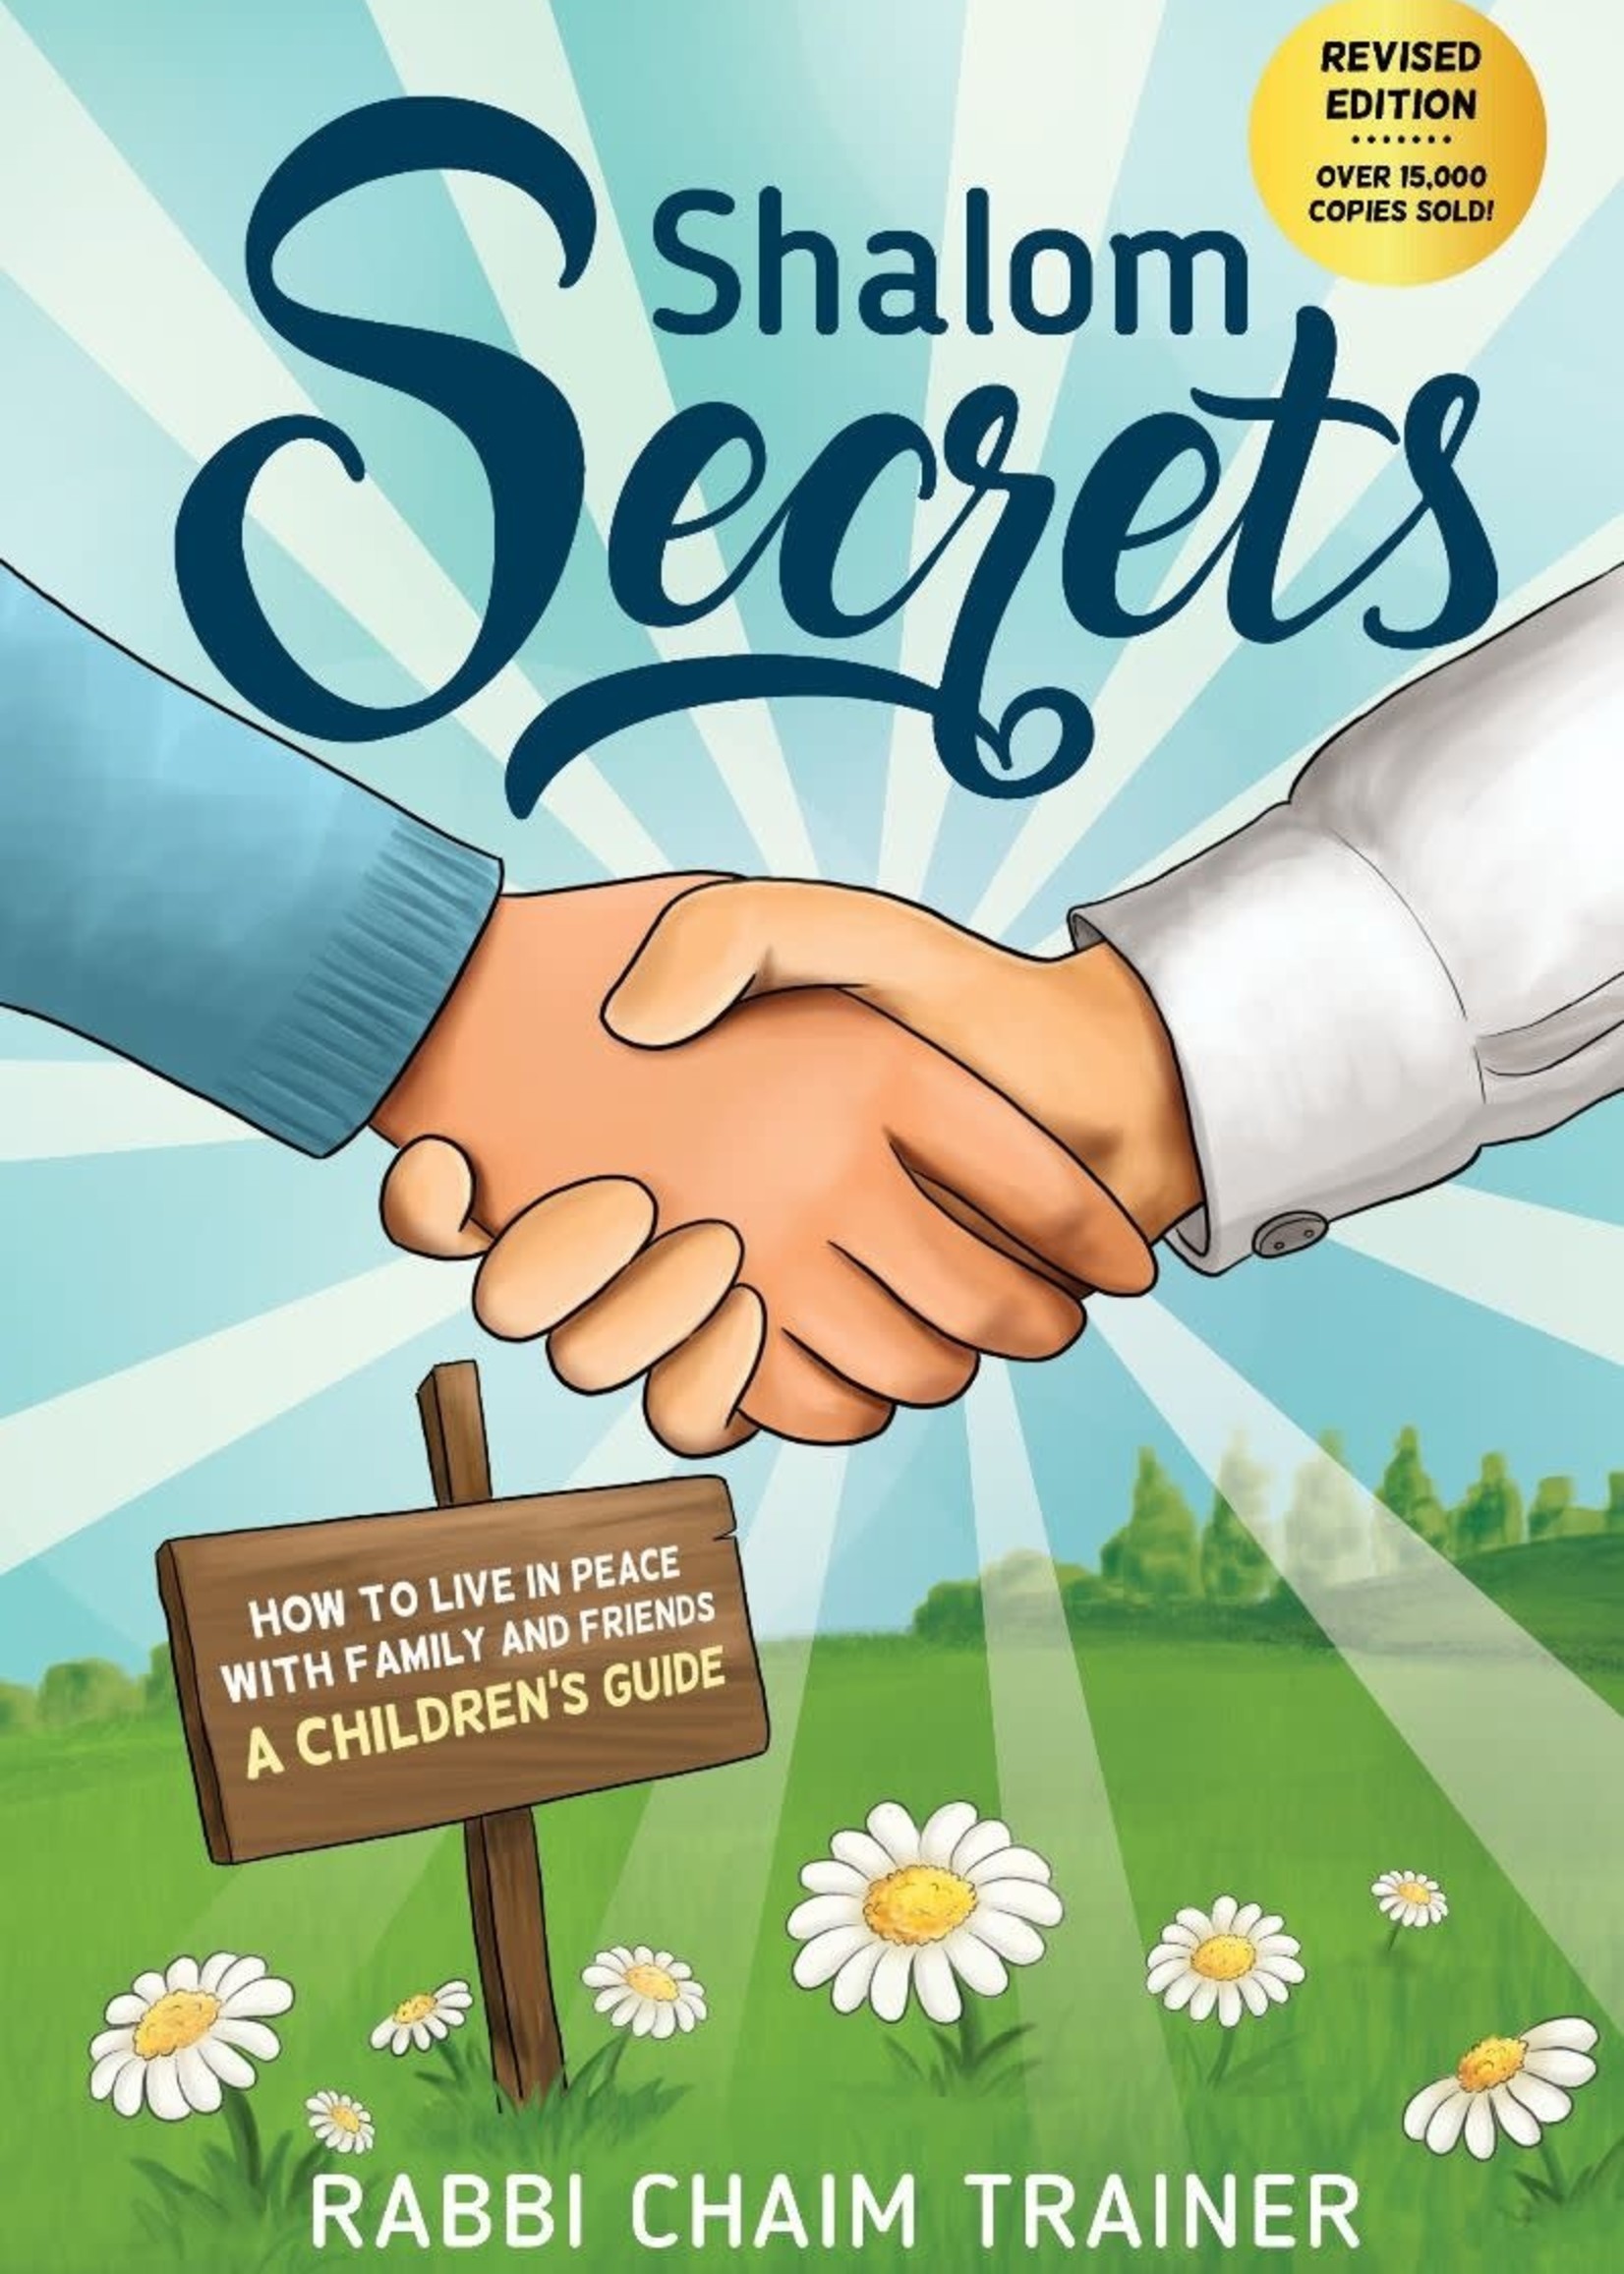 Rabbi Chaim Trainer Shalom Secrets - How To Live In Peace With Family And Friends. A Children's Guide